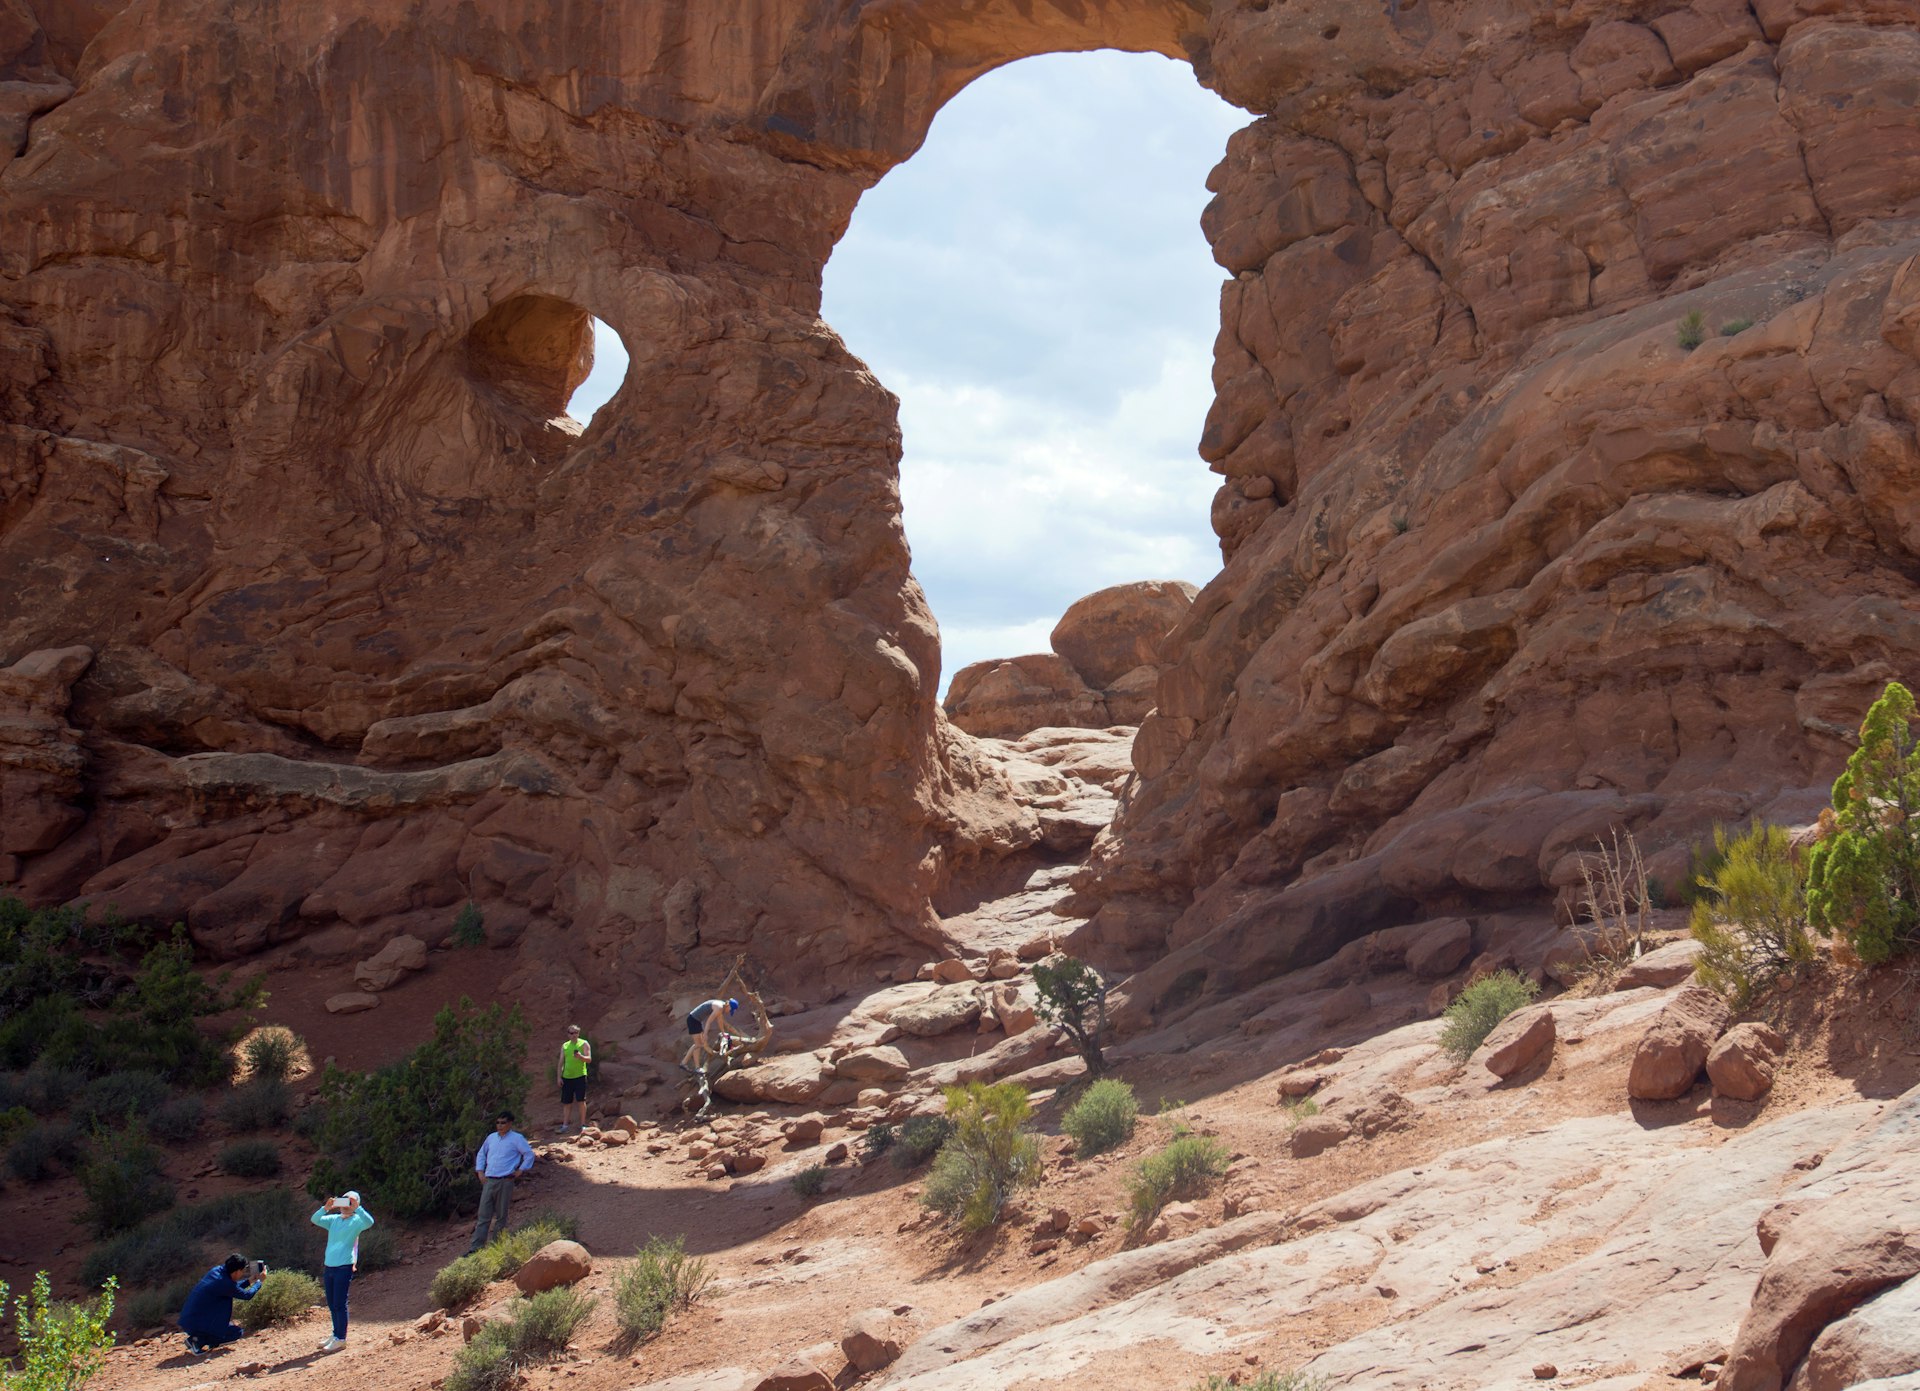 Hikers/Tourist at Arches National Park, Turret Arch, Utah.